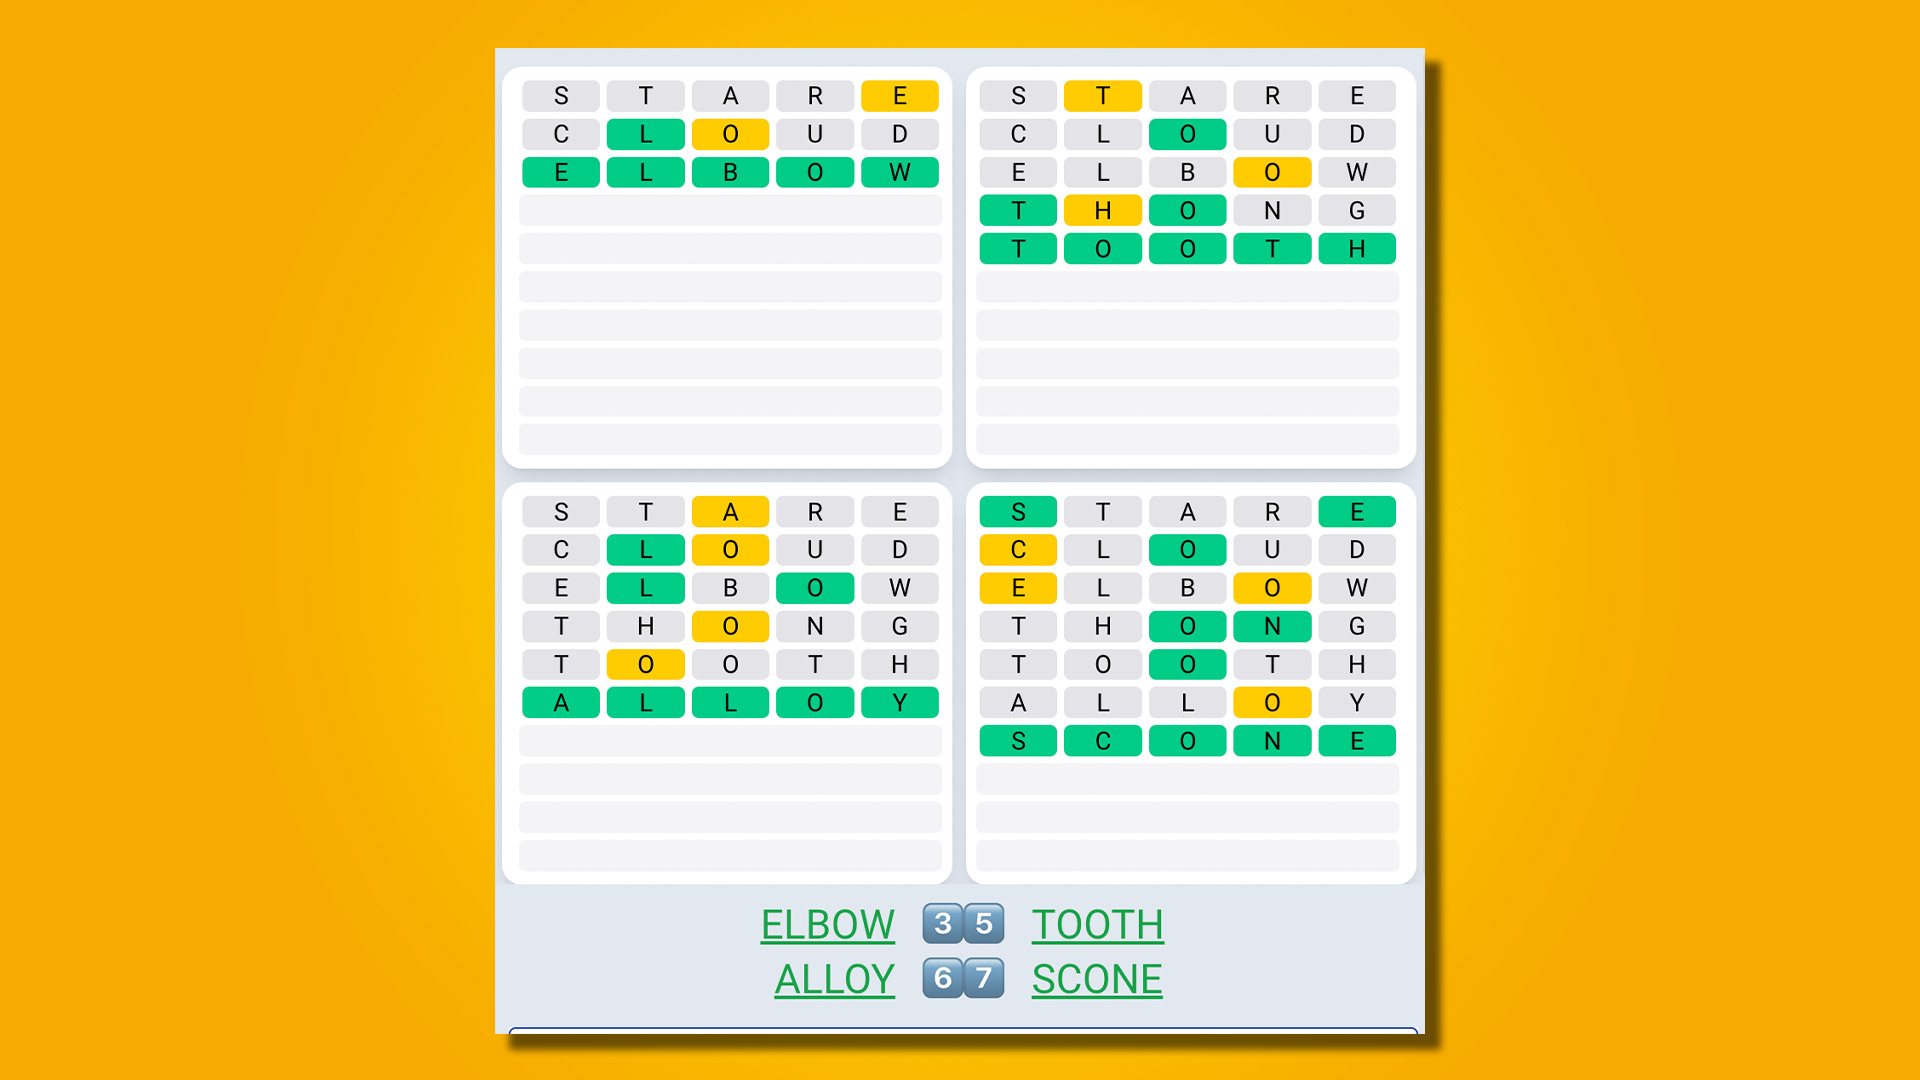 Quordle Daily Sequence answers 460 on a yellow background